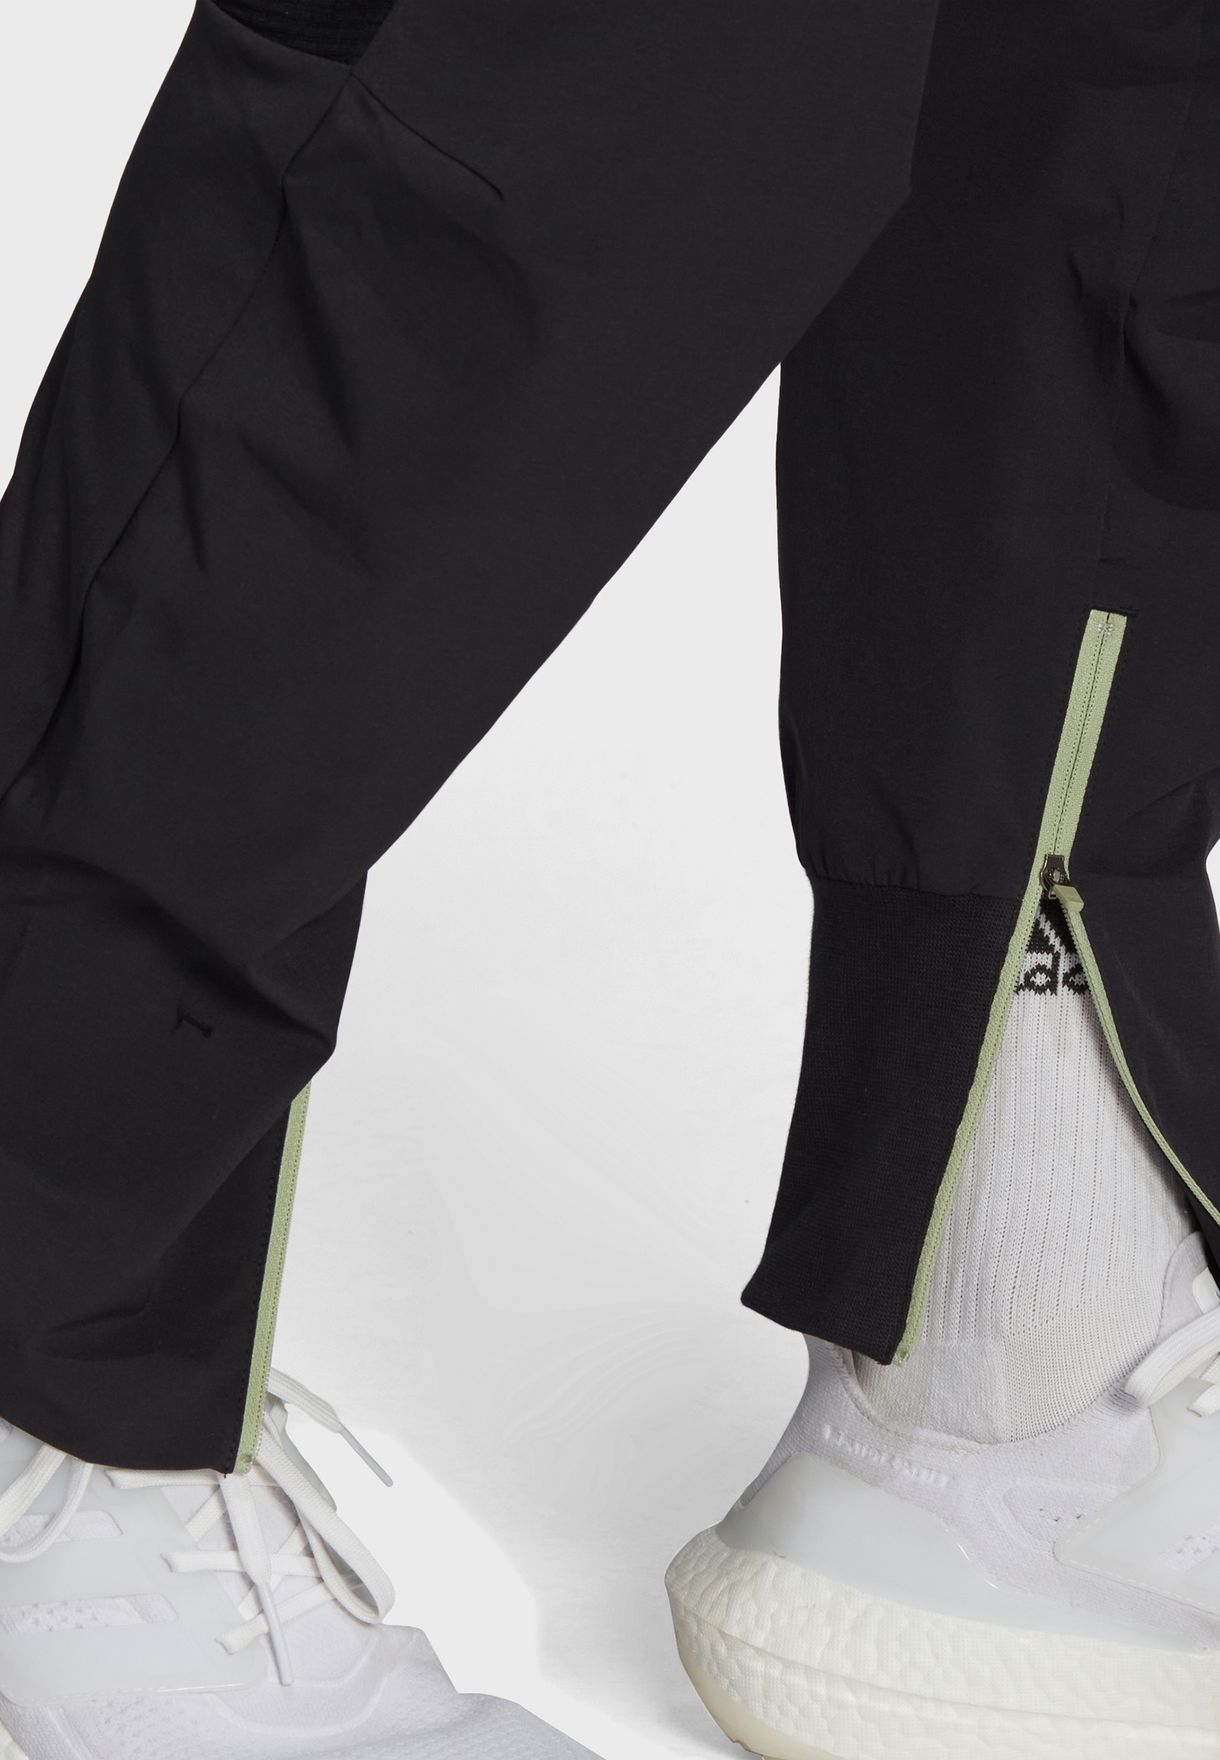 D4Gmdy World Cup Sweatpants